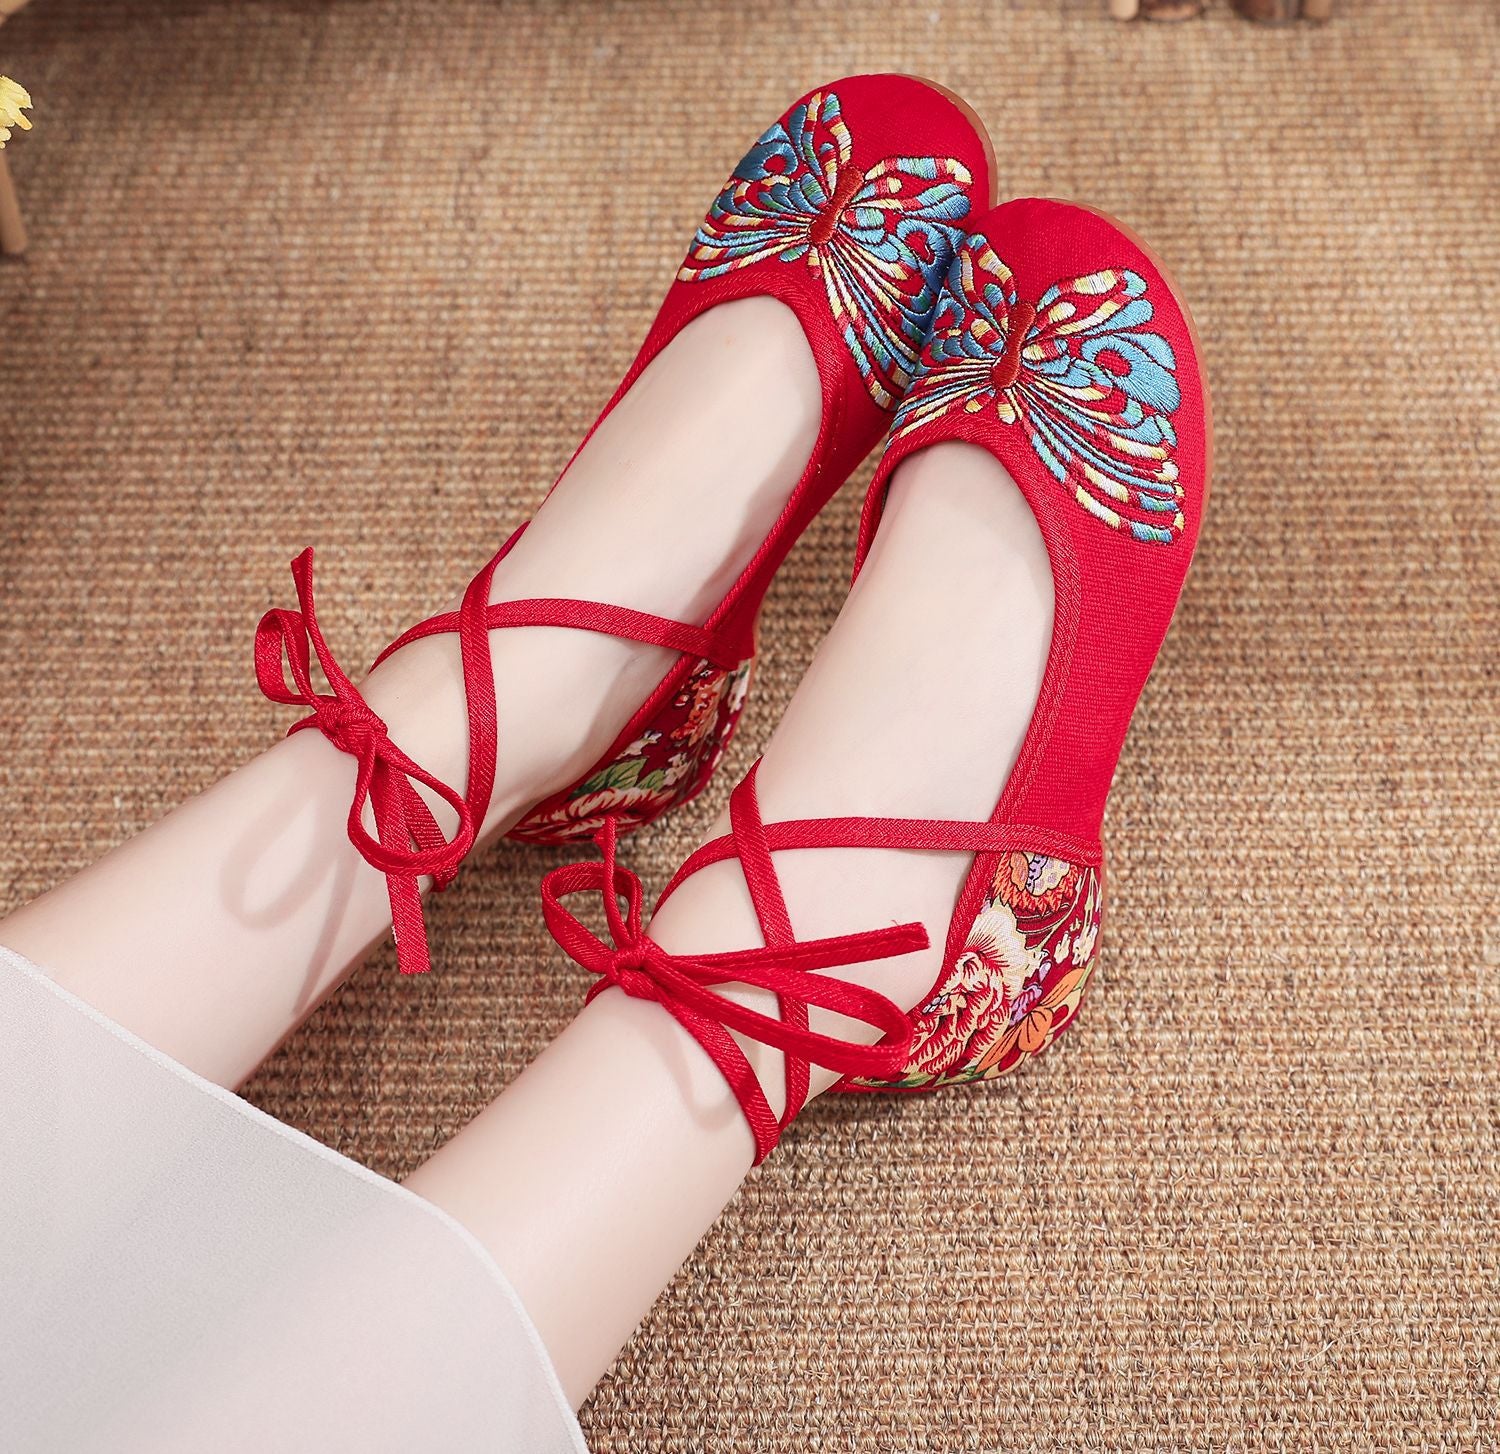 Women's Low-cut Tendon Sole Dancing Butterfly Embroidered Cloth Casual Shoes